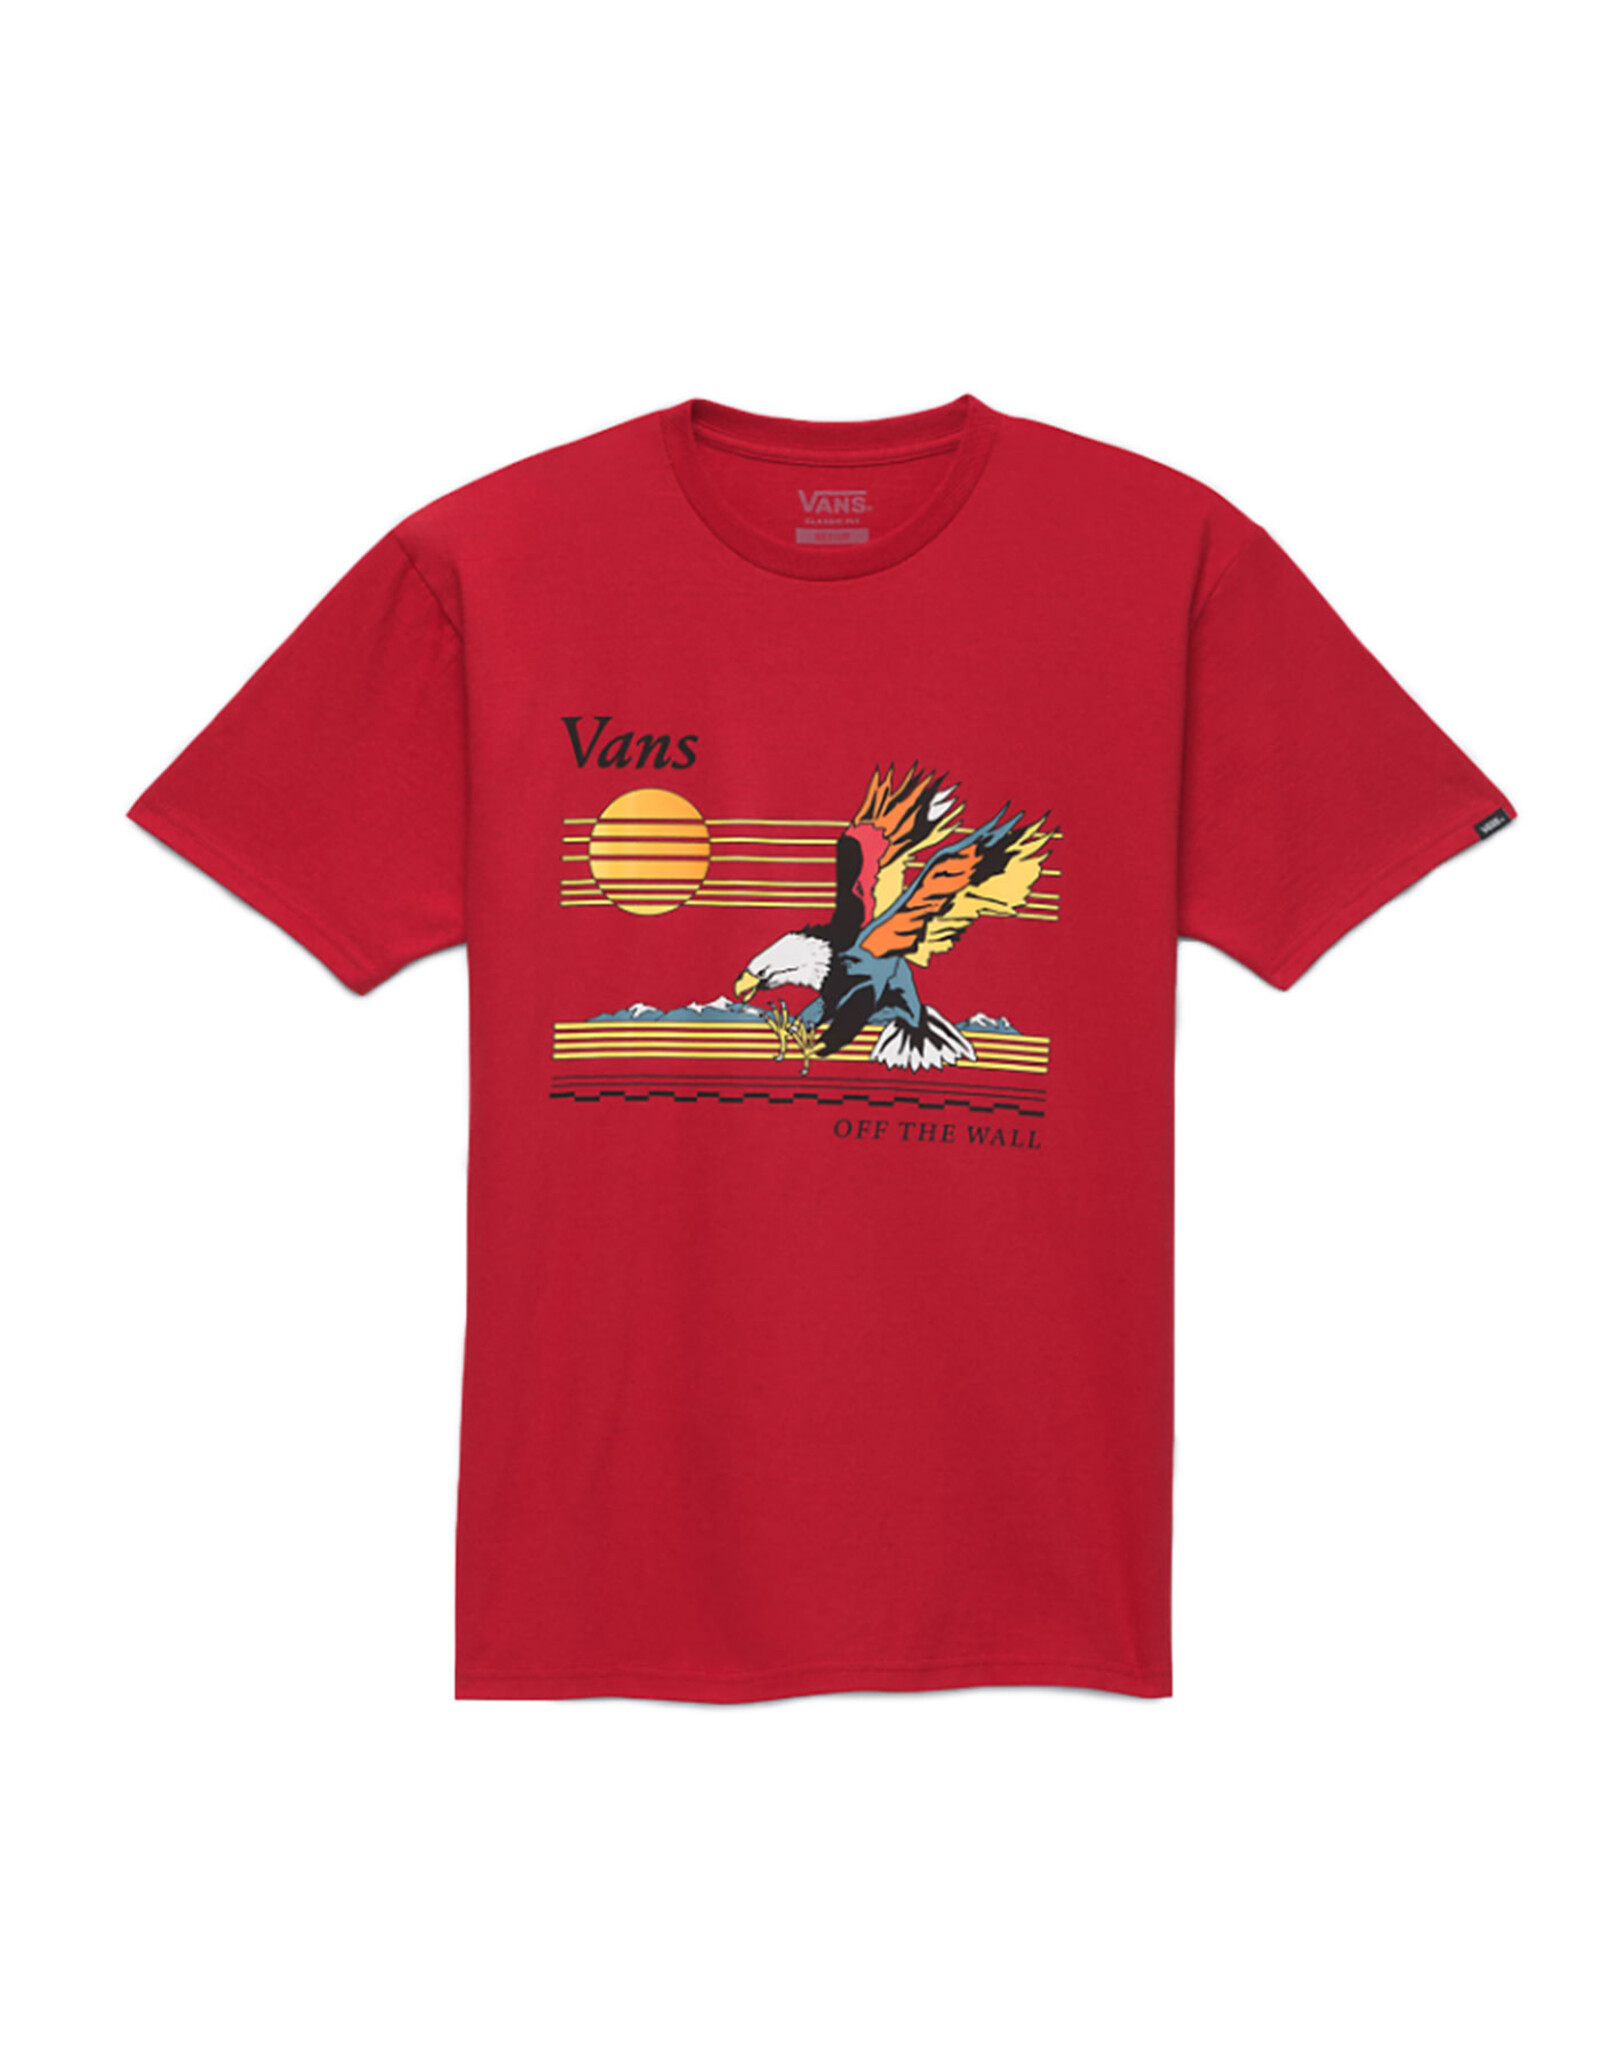 SOARING EAGLE SS TEE Chili Pepper - VN0008RR14A1